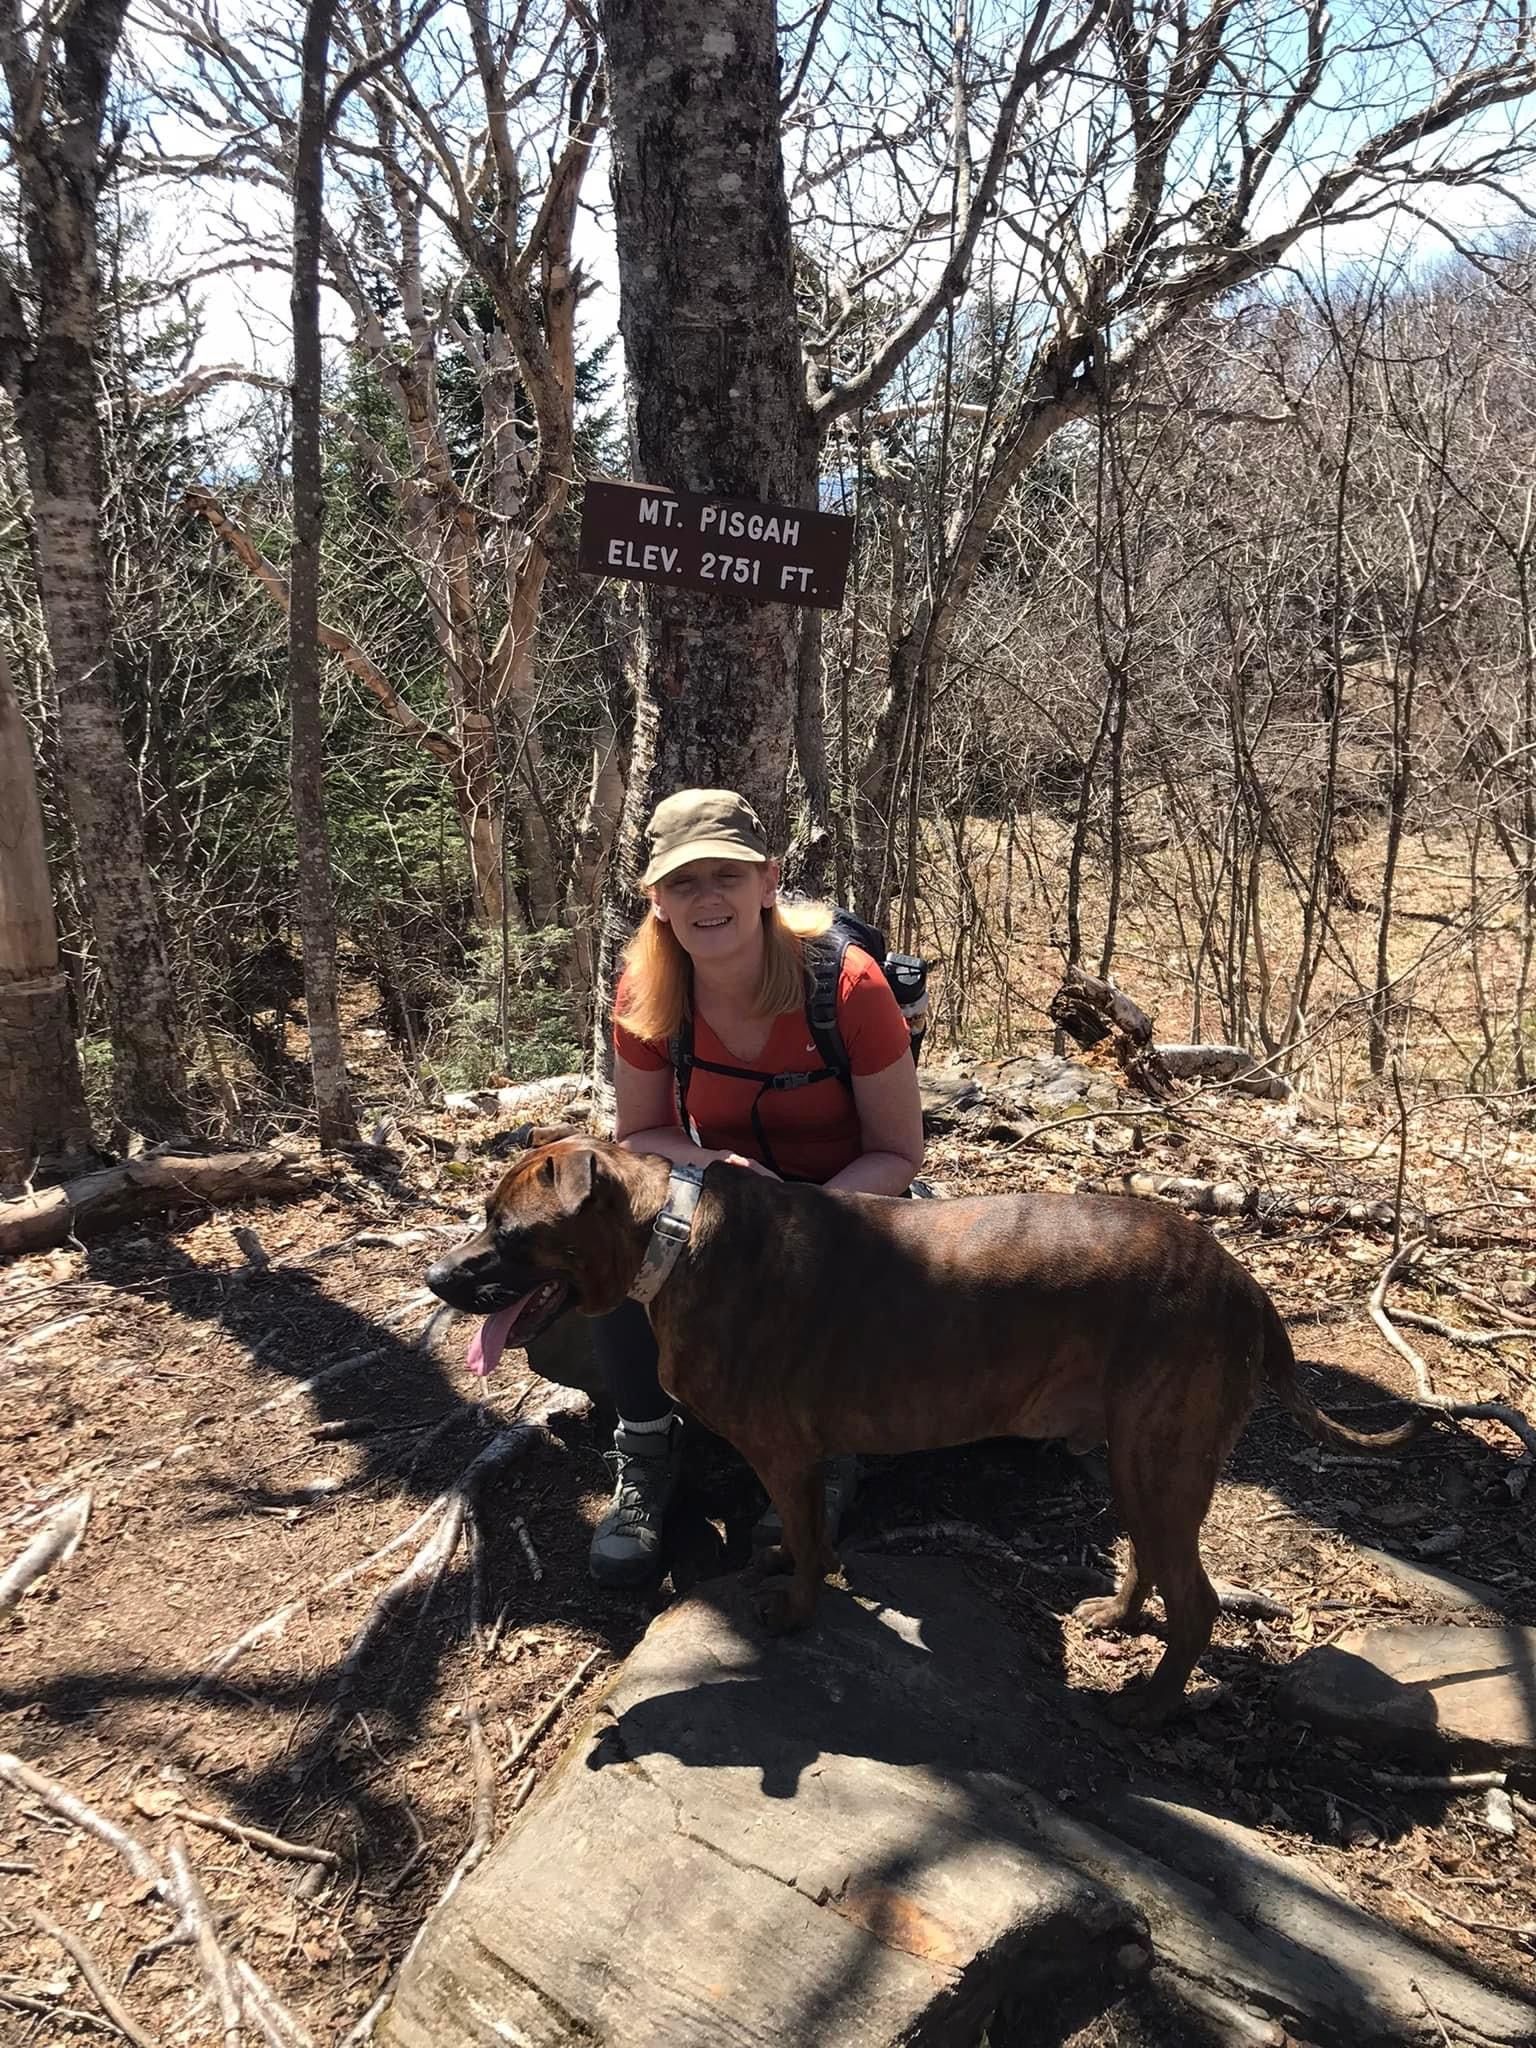 Jenifer with a dog in front of a Mount Pisgah trail sign.